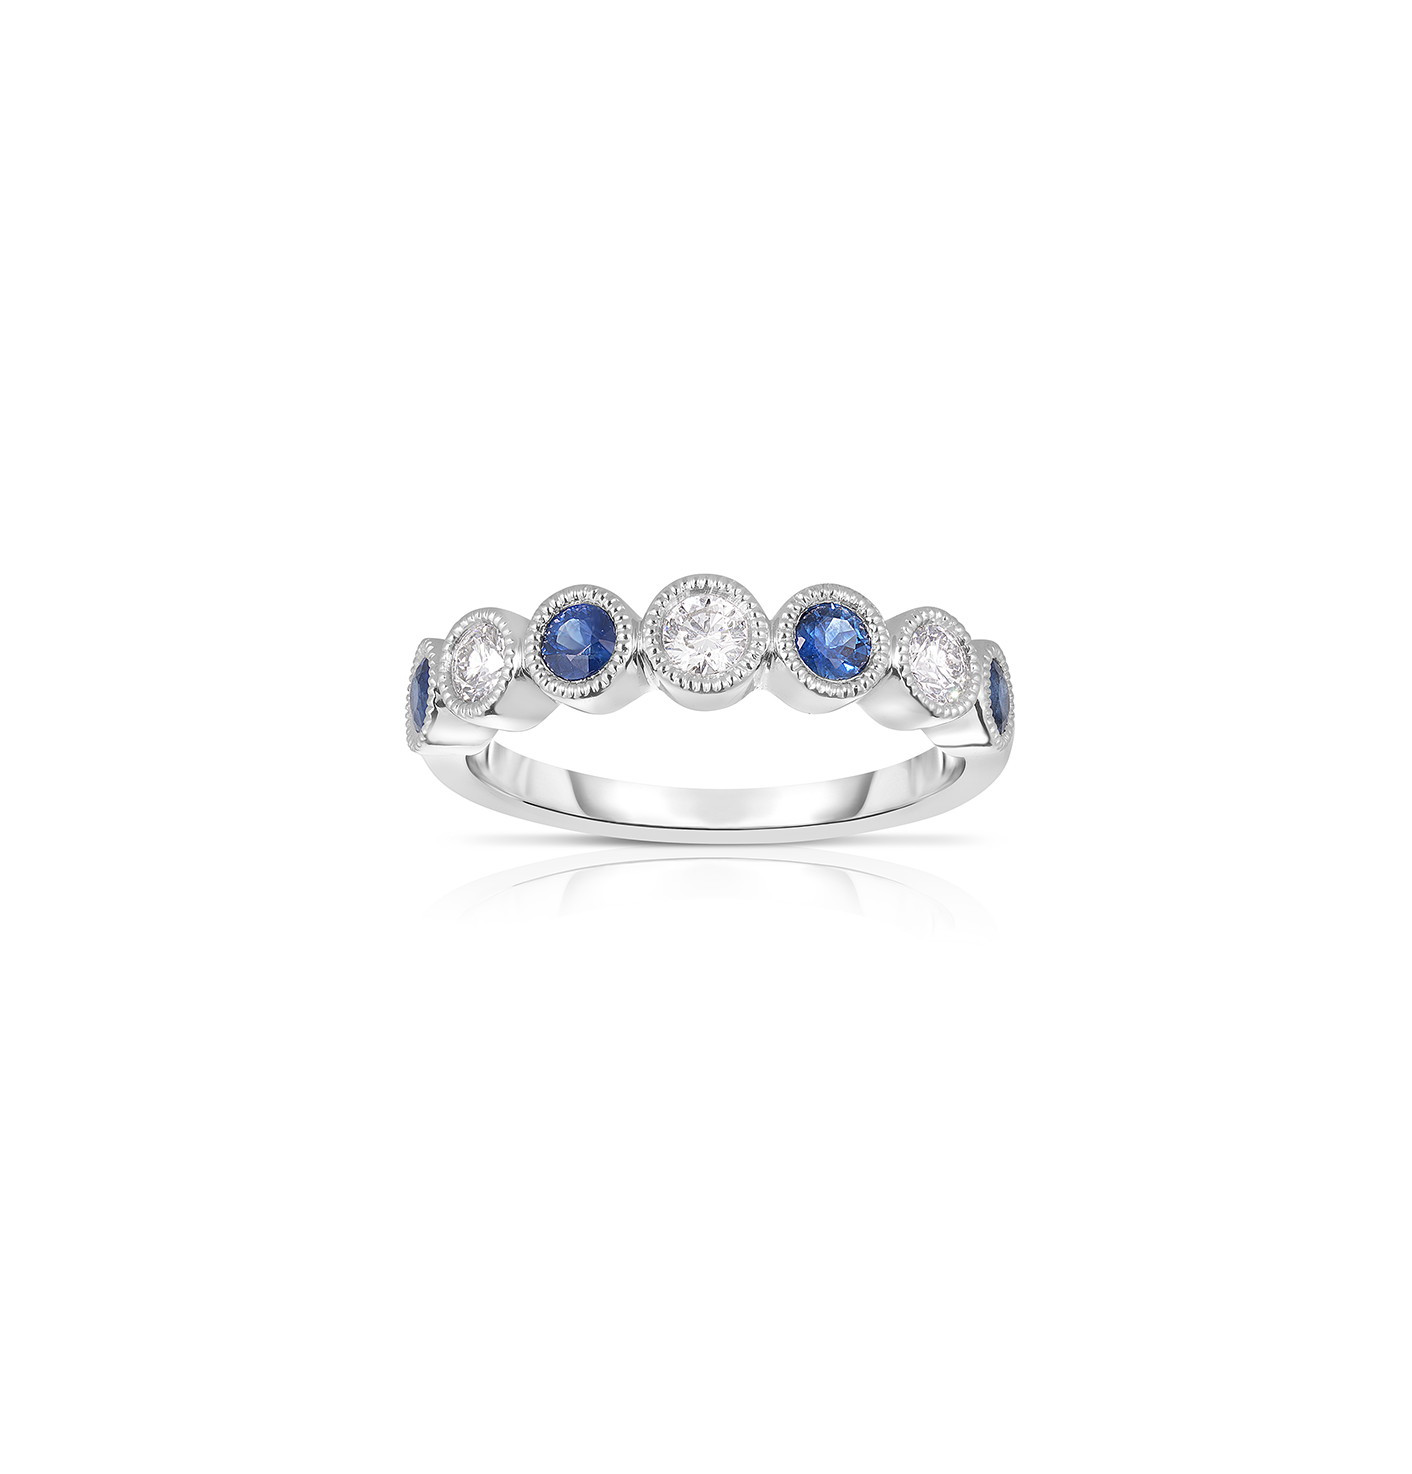 Sabel Collection White Gold Milgrain Sapphire and Diamond Ring